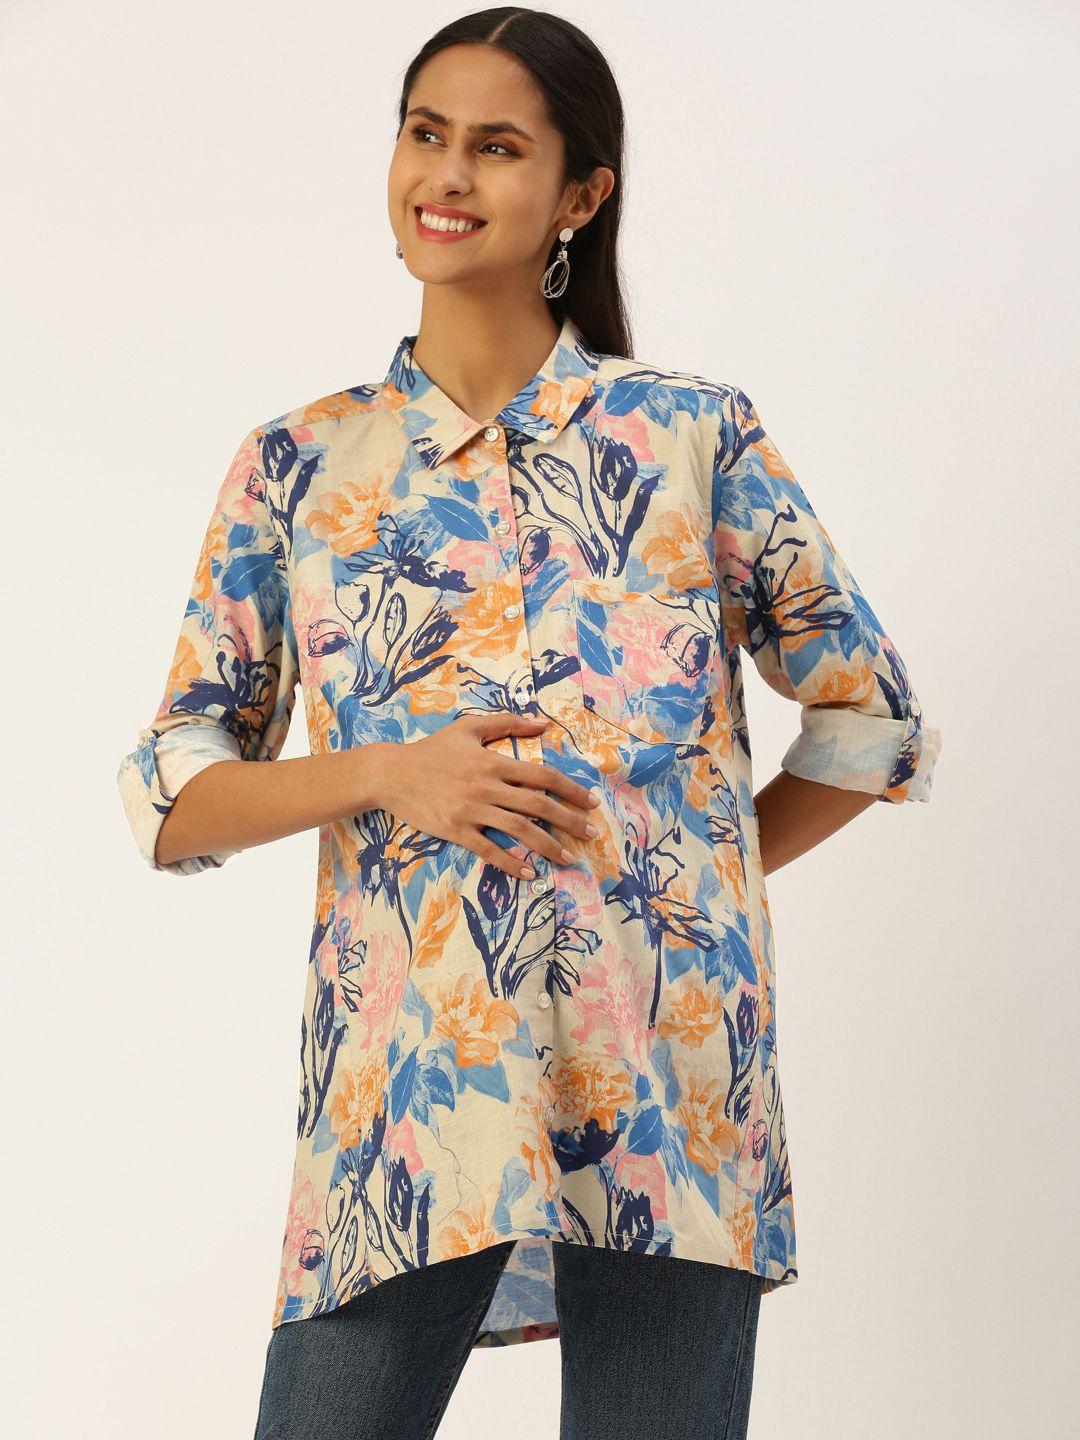 blush 9 maternity women relaxed floral printed maternity shirt